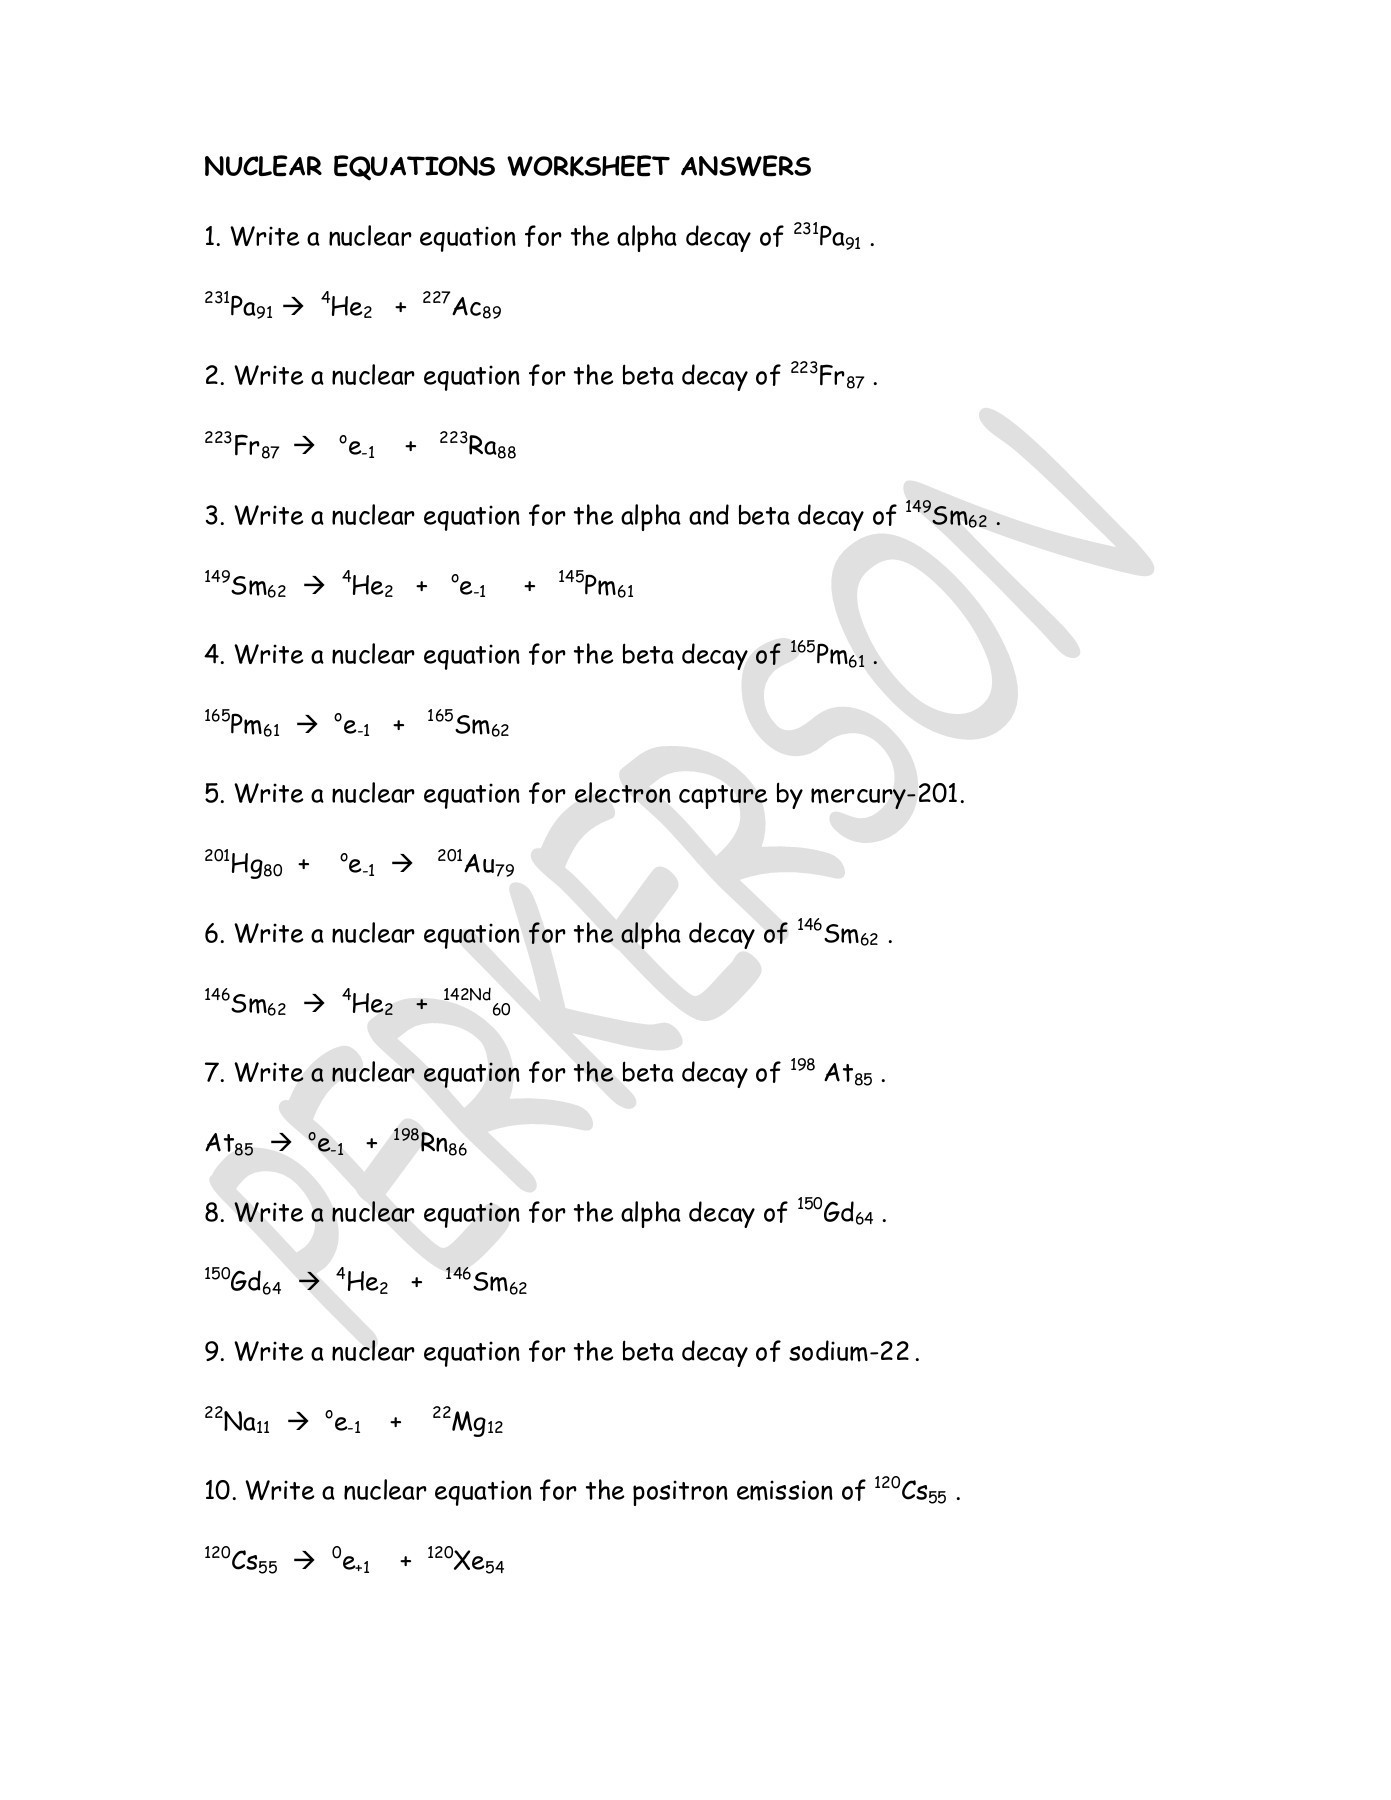 Nuclear Equations Worksheet Answers Nuclear Equations Worksheet Answers Typepad Pages 1 3